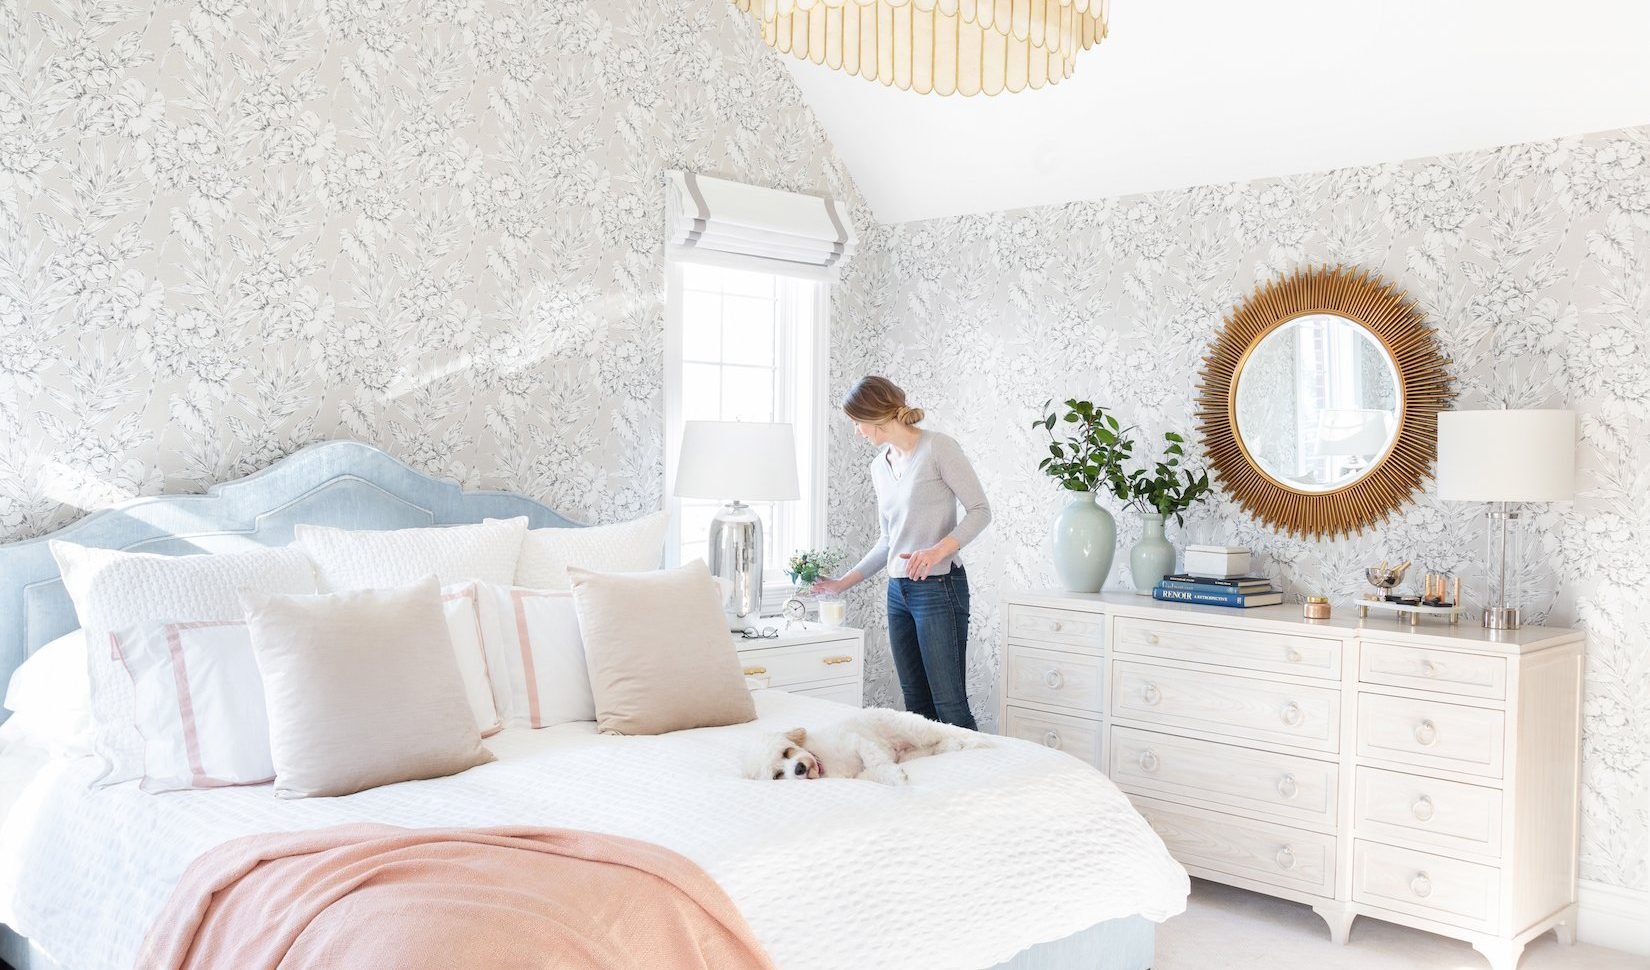 How to Use (and Remove) Peel and Stick Wallpaper | Havenly Blog | Havenly  Interior Design Blog